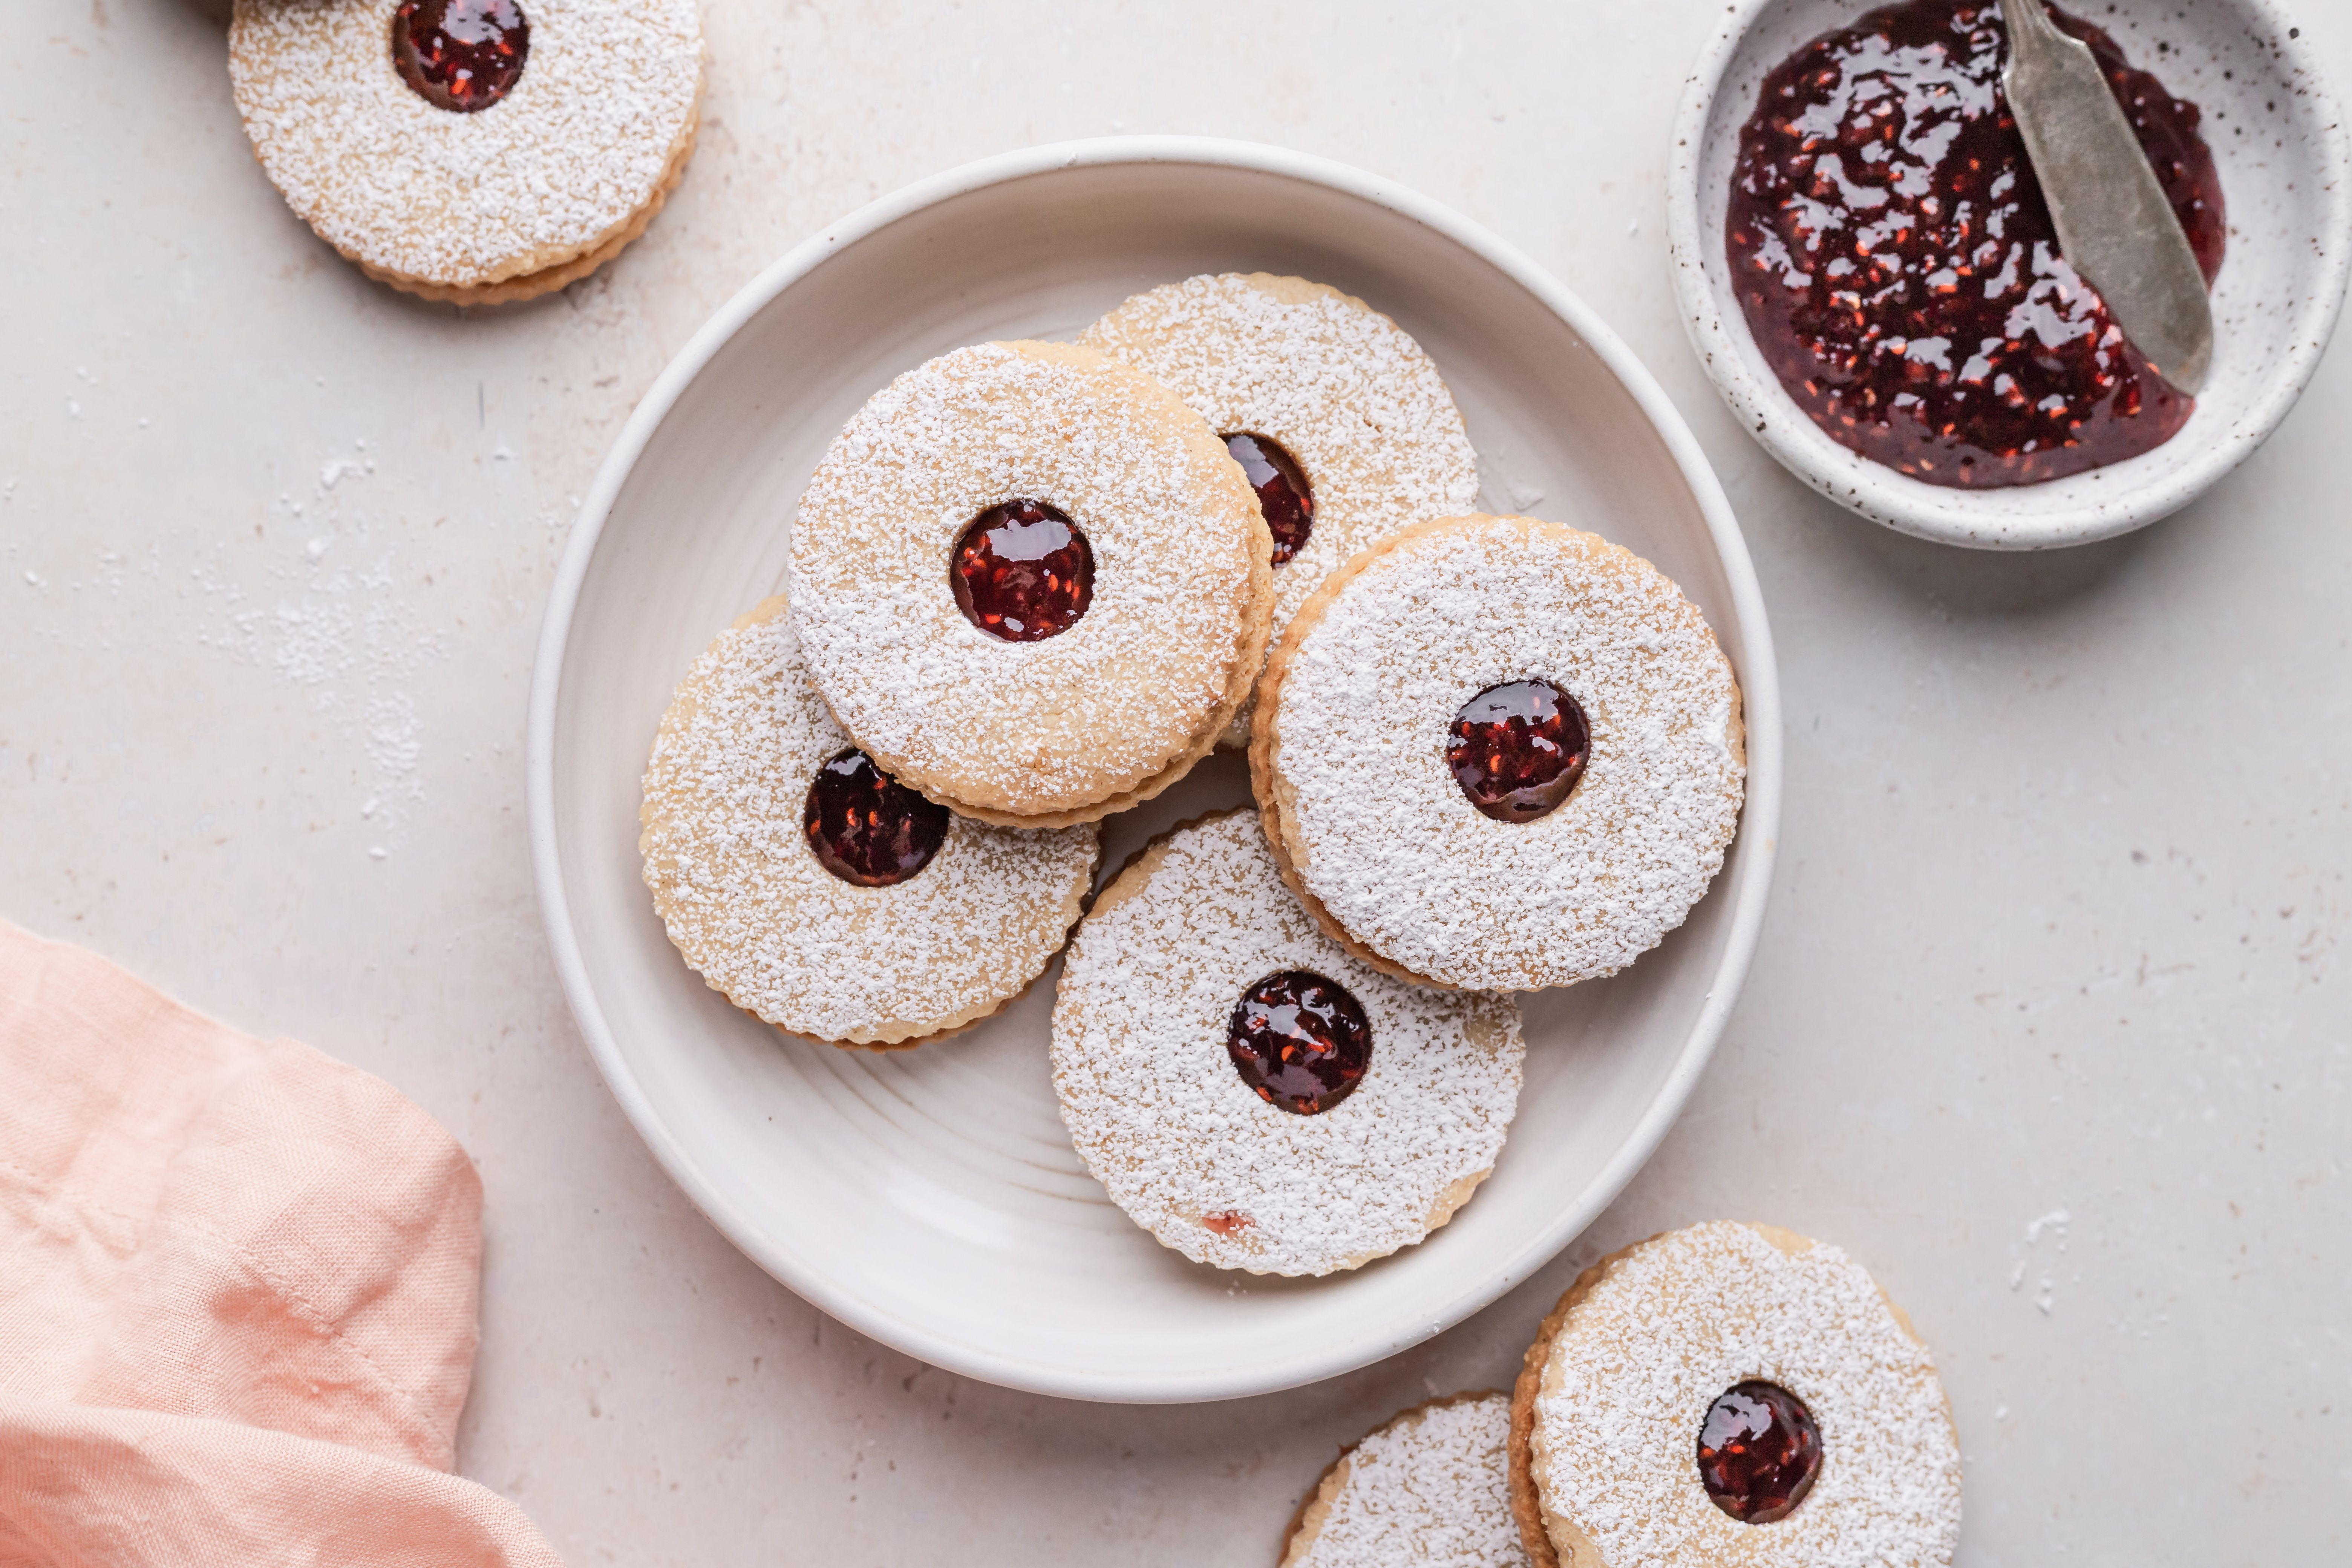 Linzer Cookies are the Jam-Filled Cookies of Your Dreams